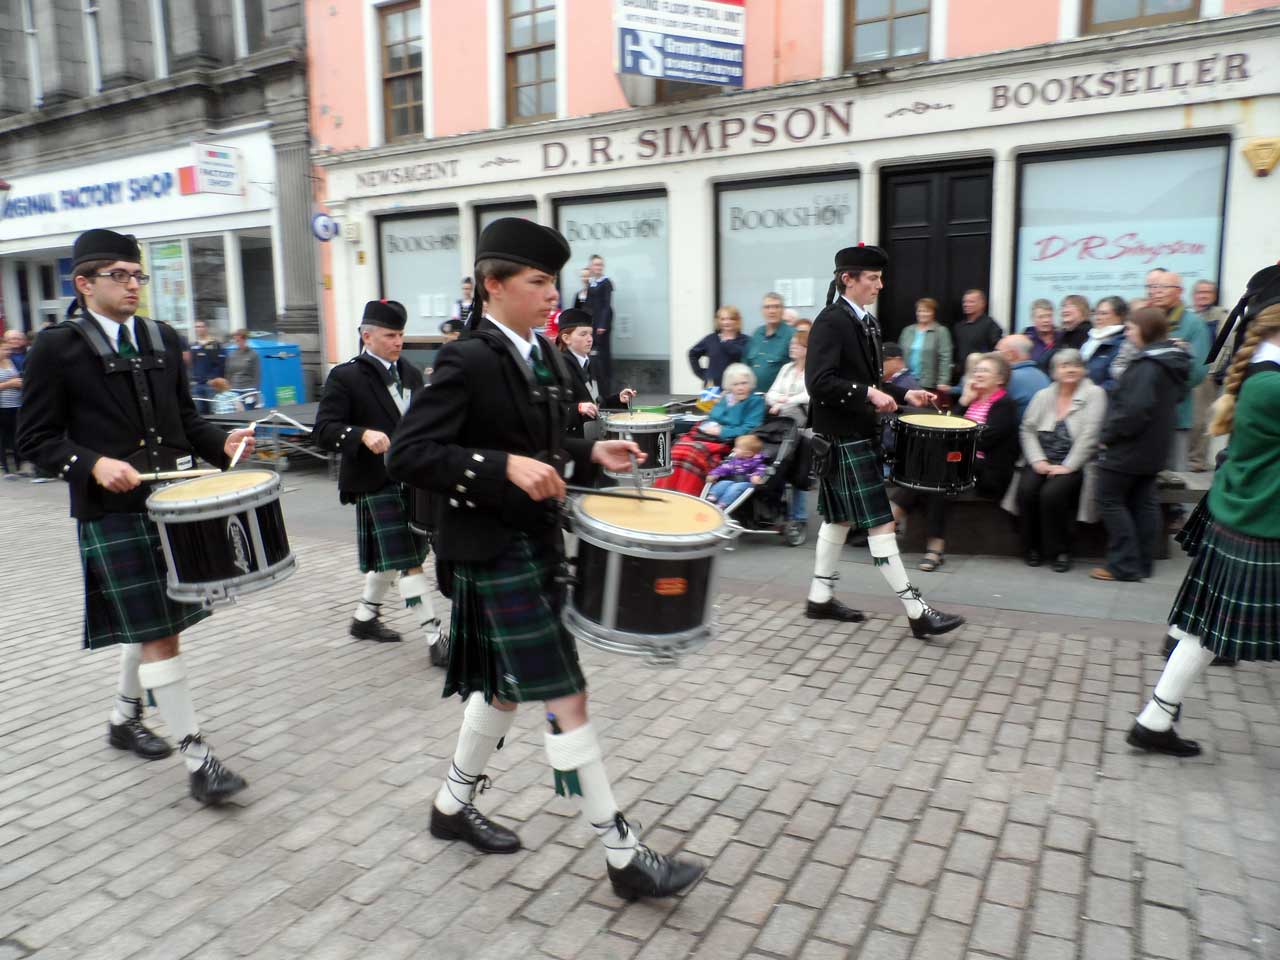 Photo: Wick Pipe Band and Highland Dancers In Market Square, Wick